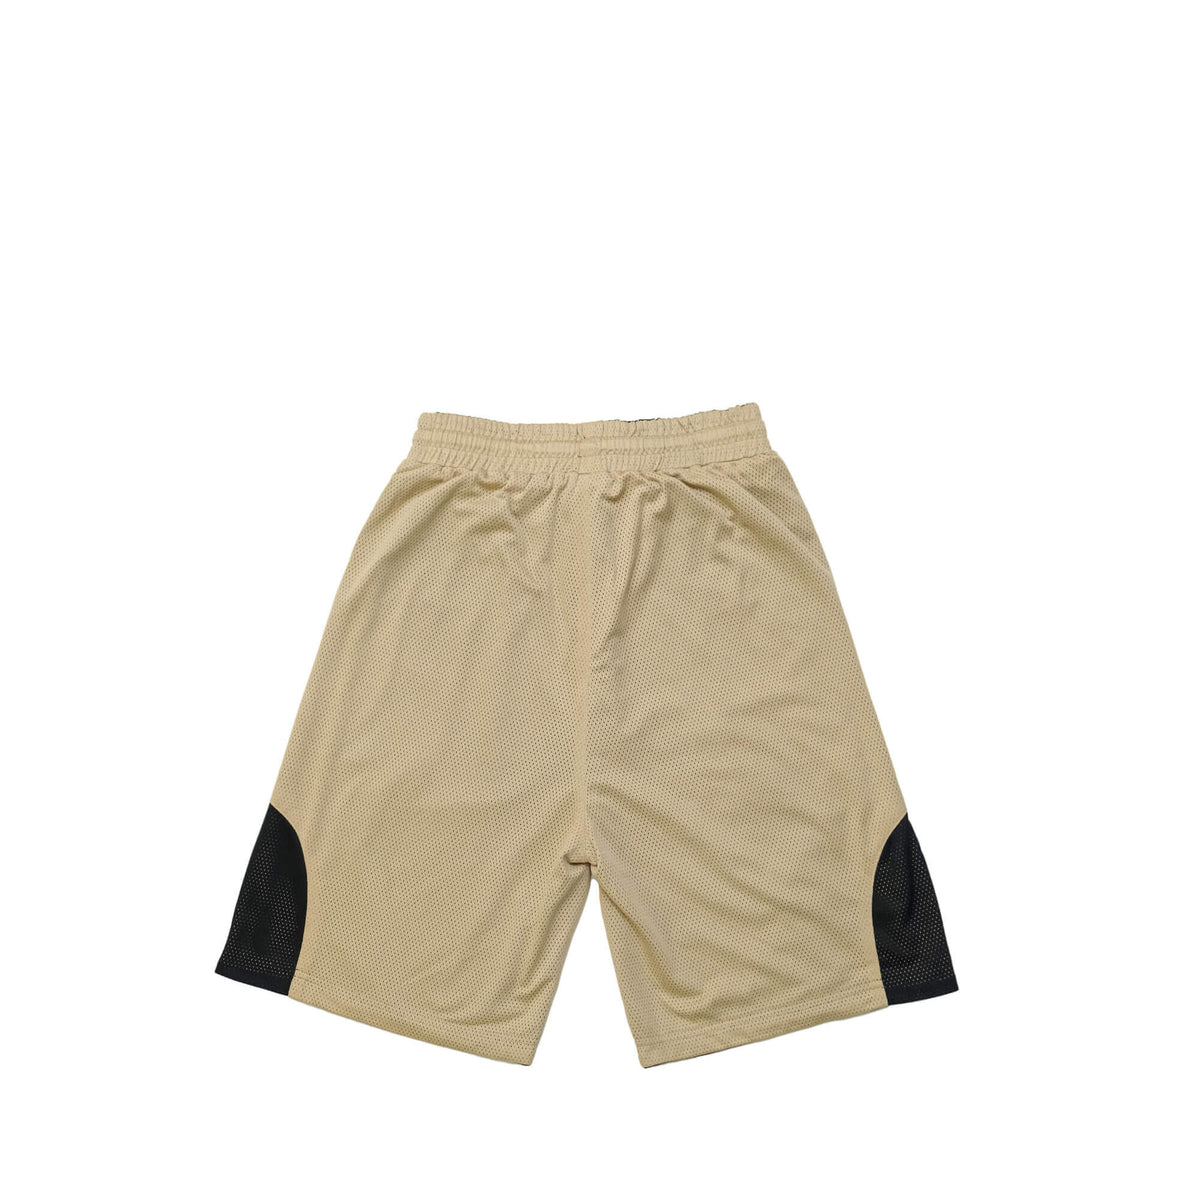 back view of the gold side of the reversible mesh short